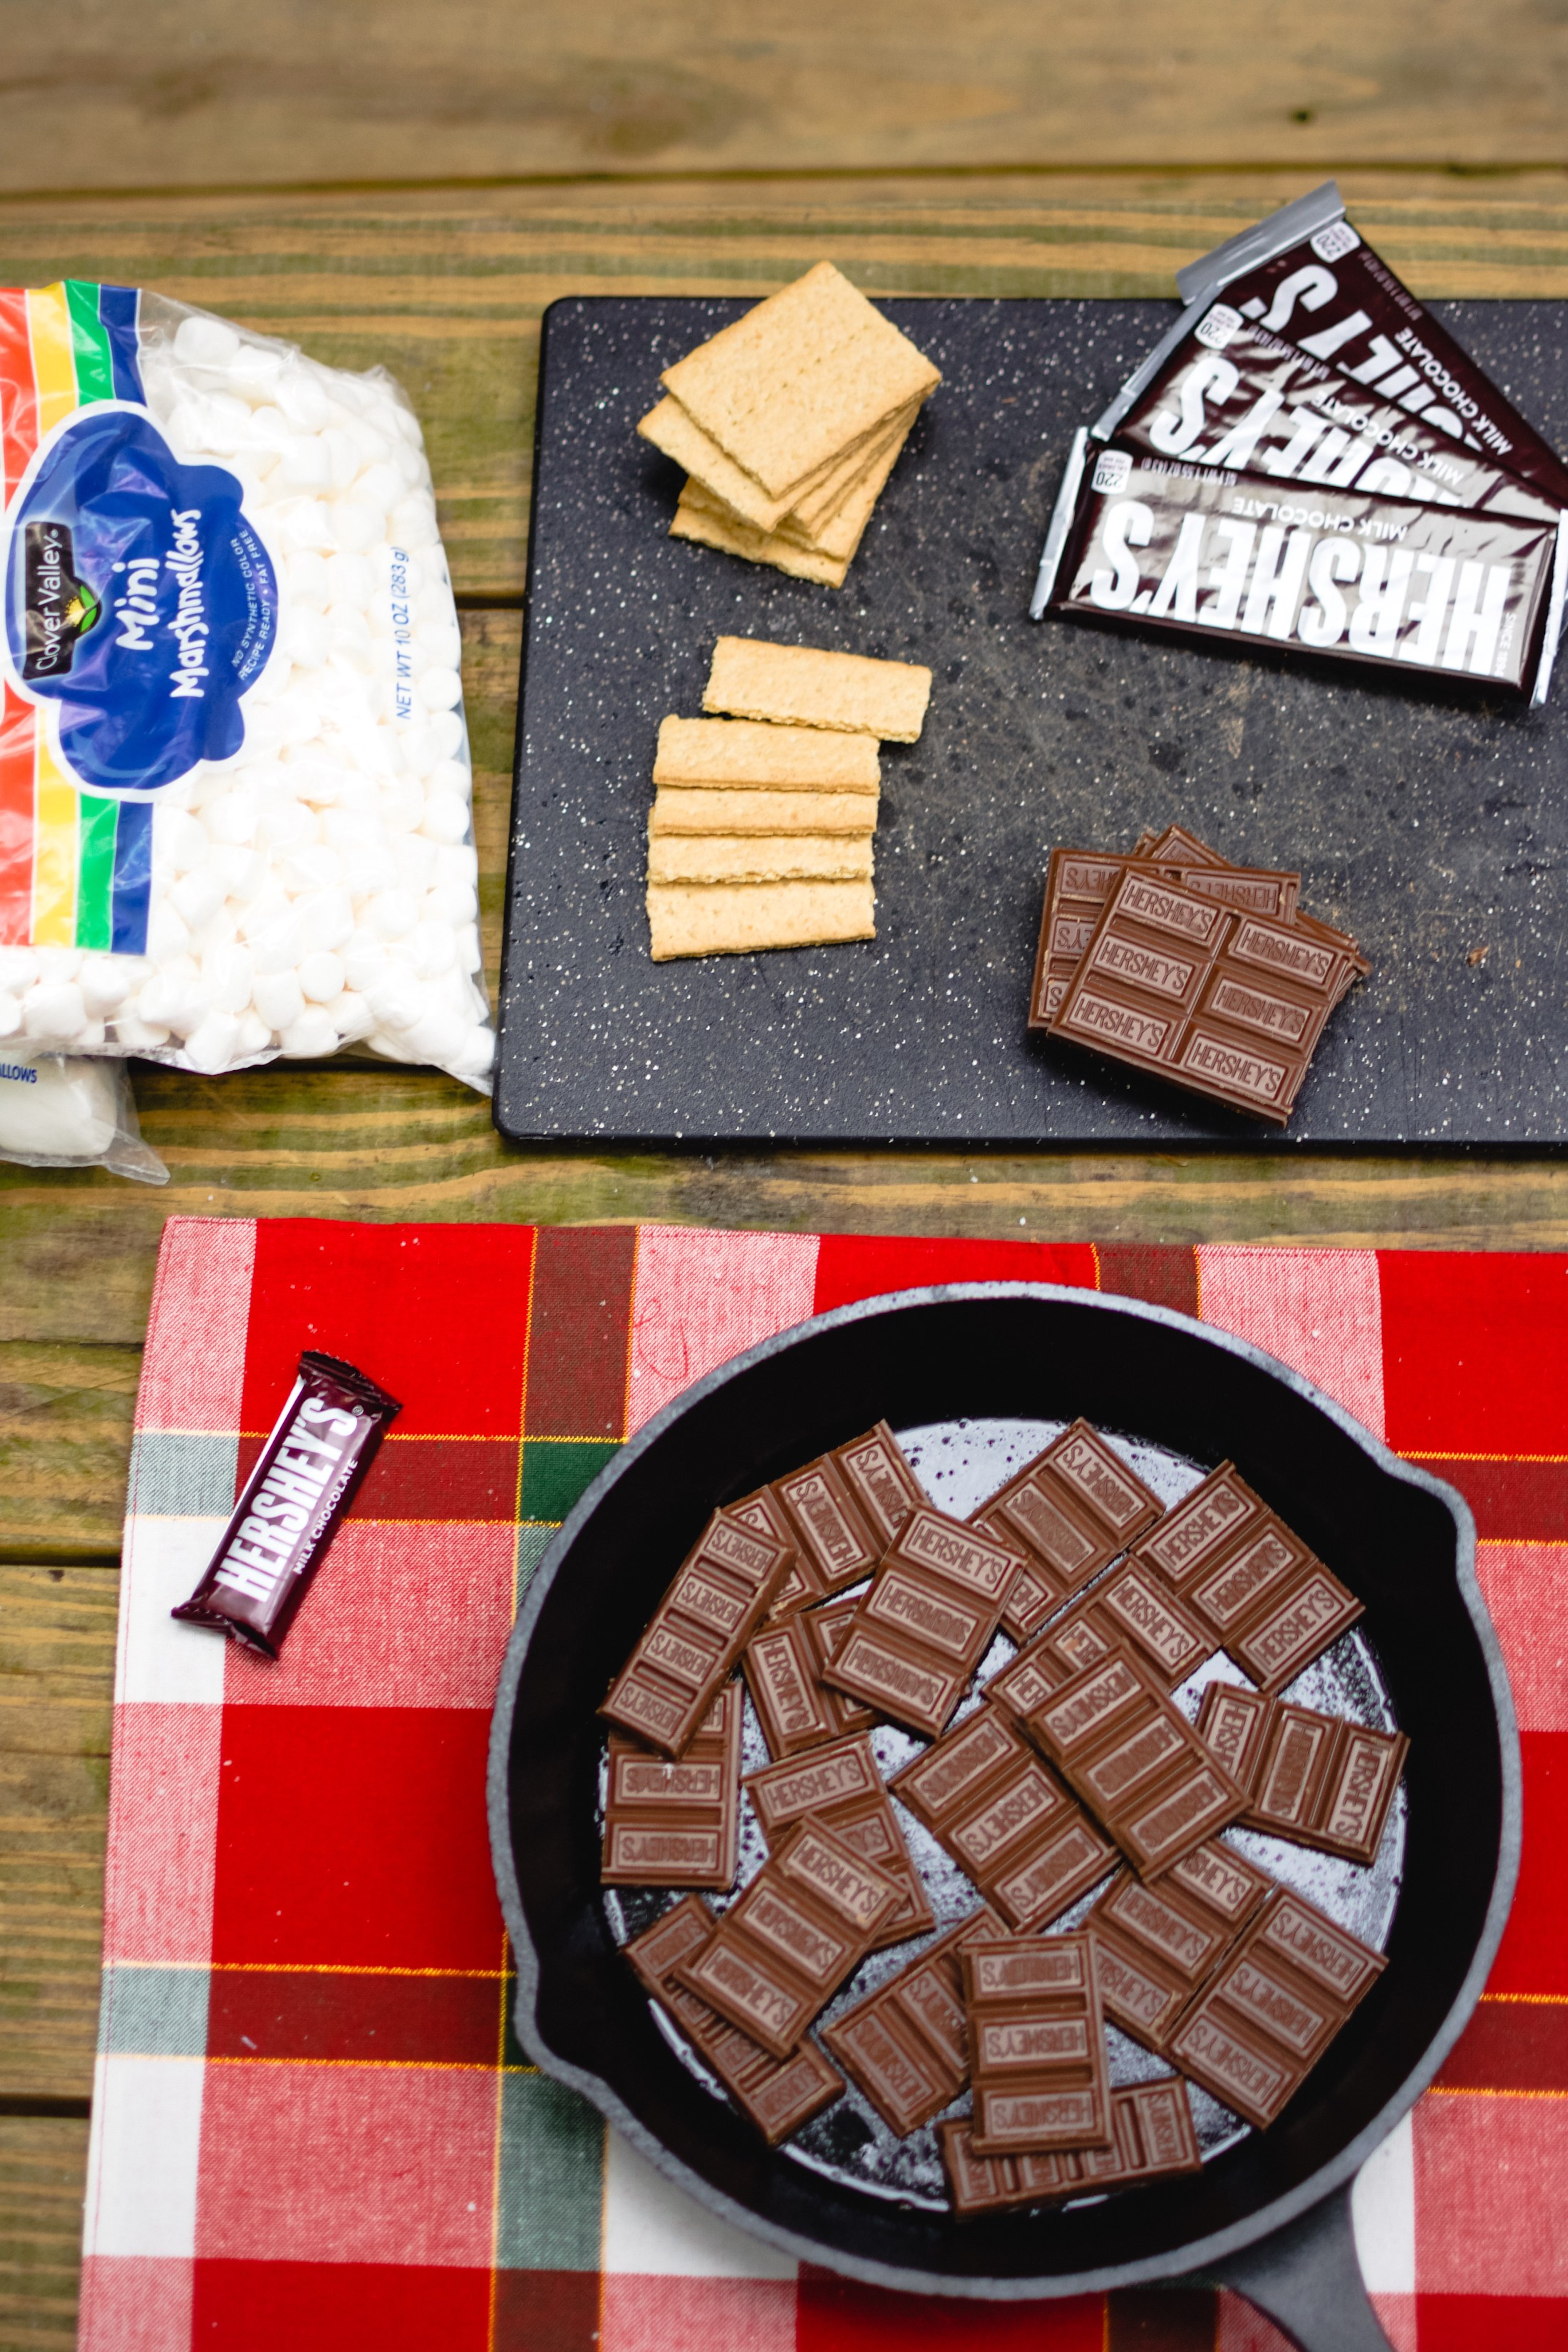 S'mores ingredients on a picnic table, with Hershey's chocolates, marshmallows, and graham crackers